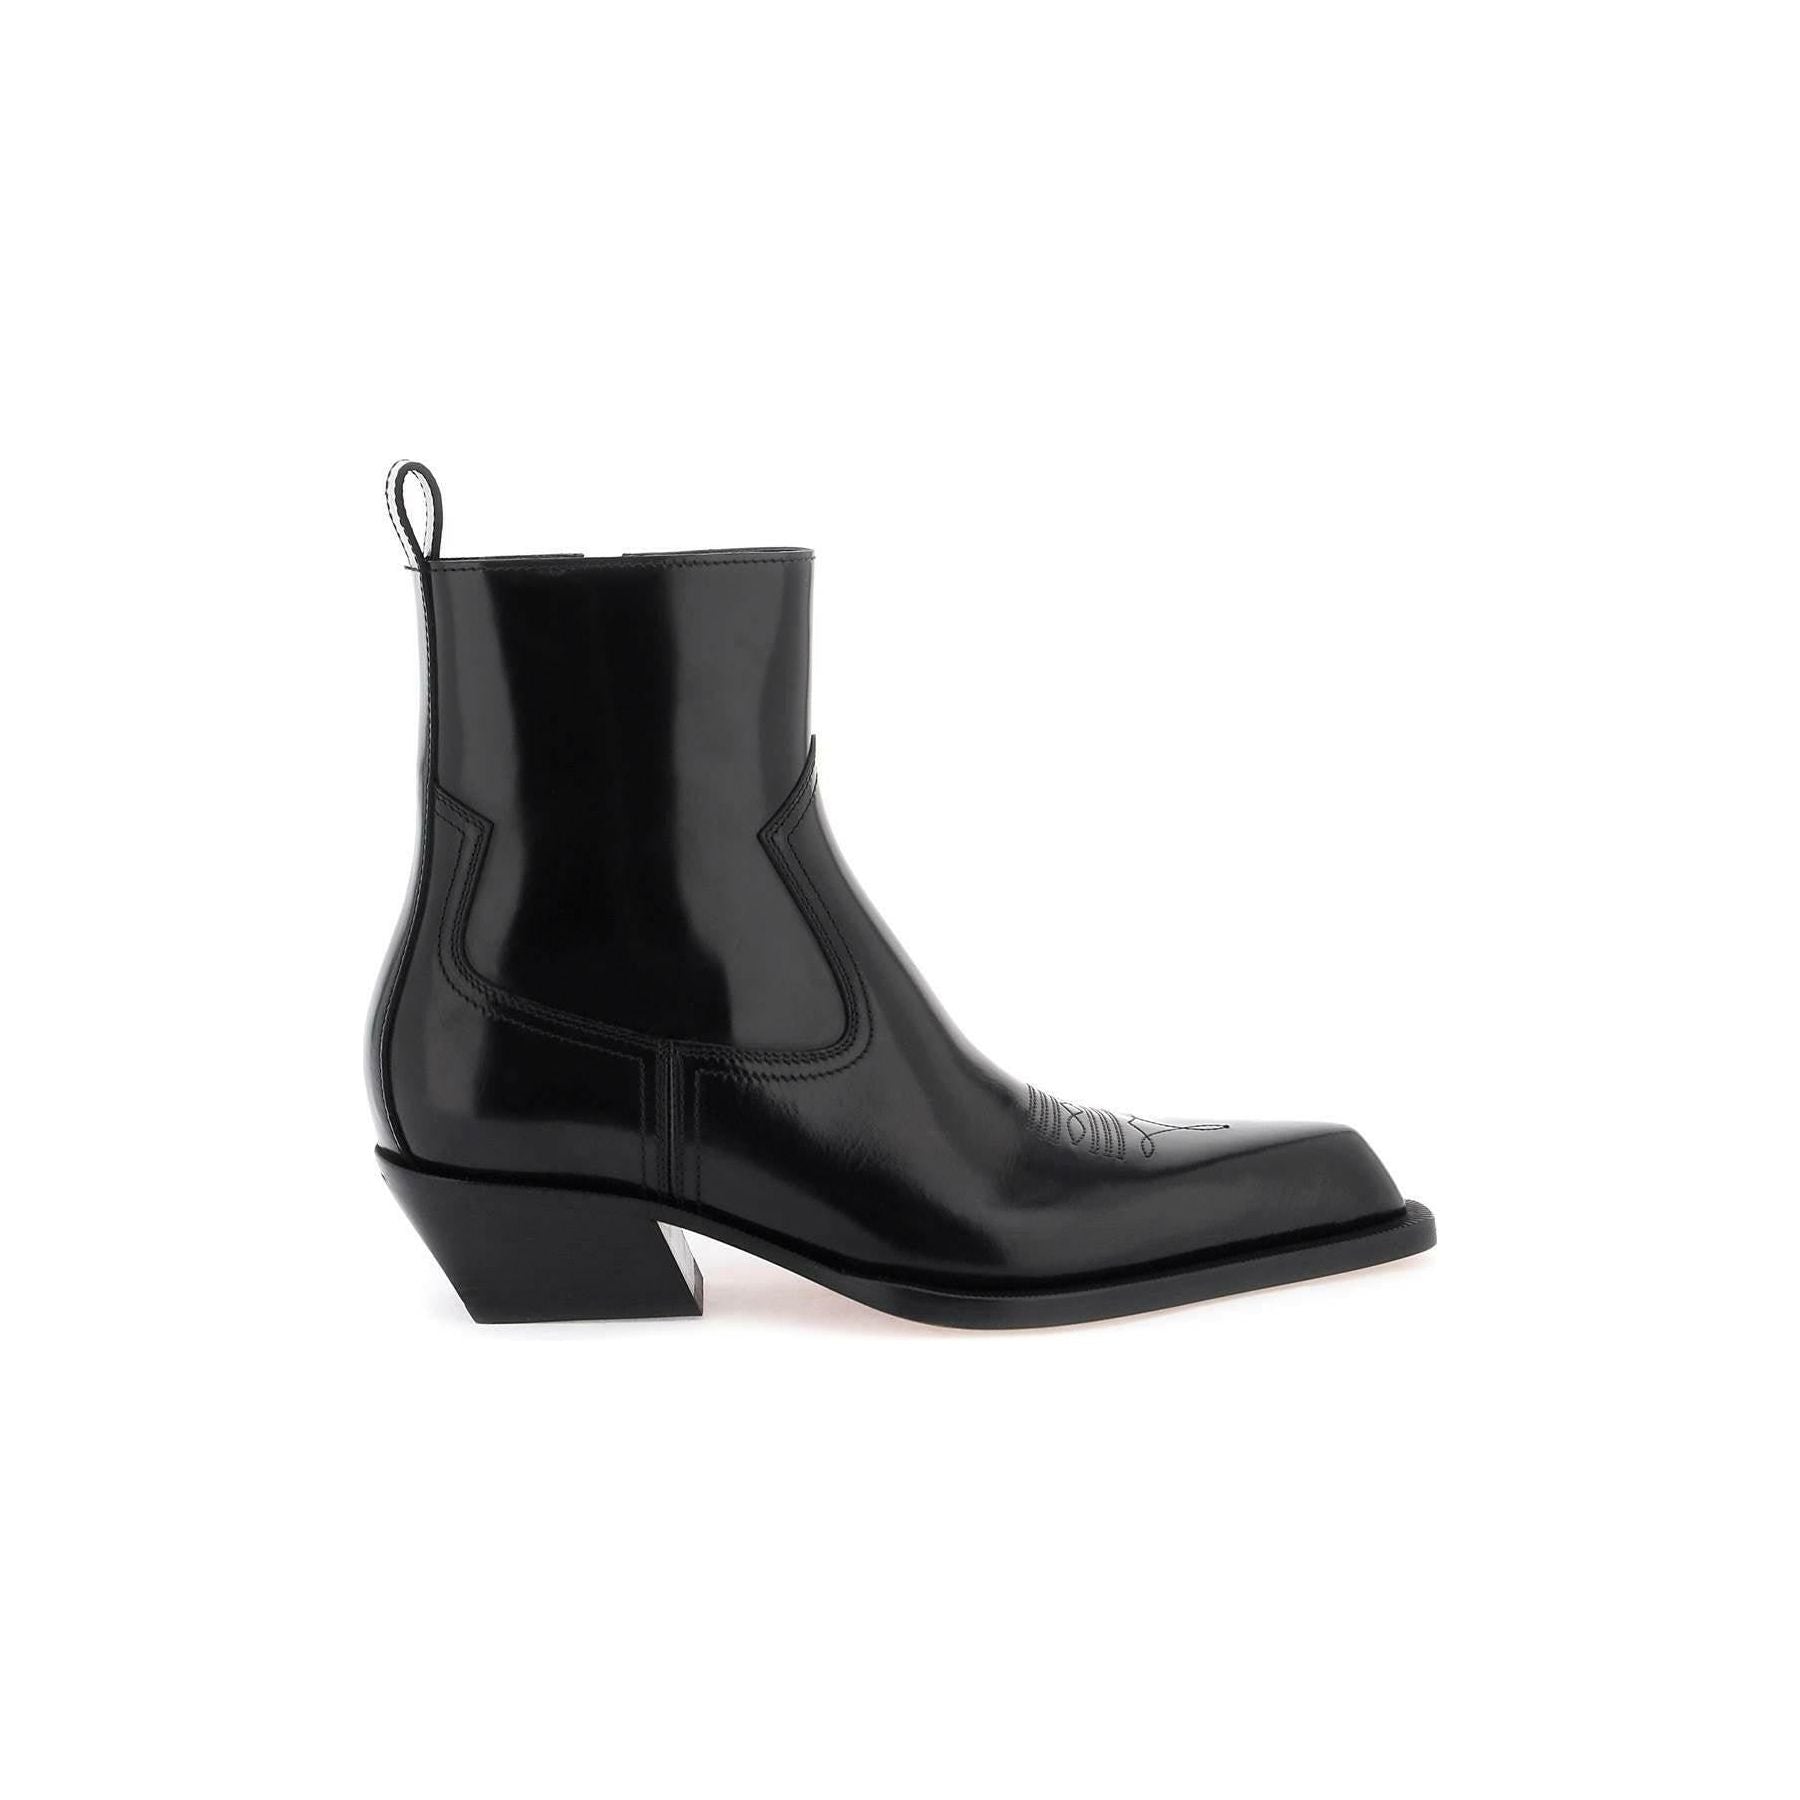 Leather Texan Ankle Boots OFF-WHITE JOHN JULIA.